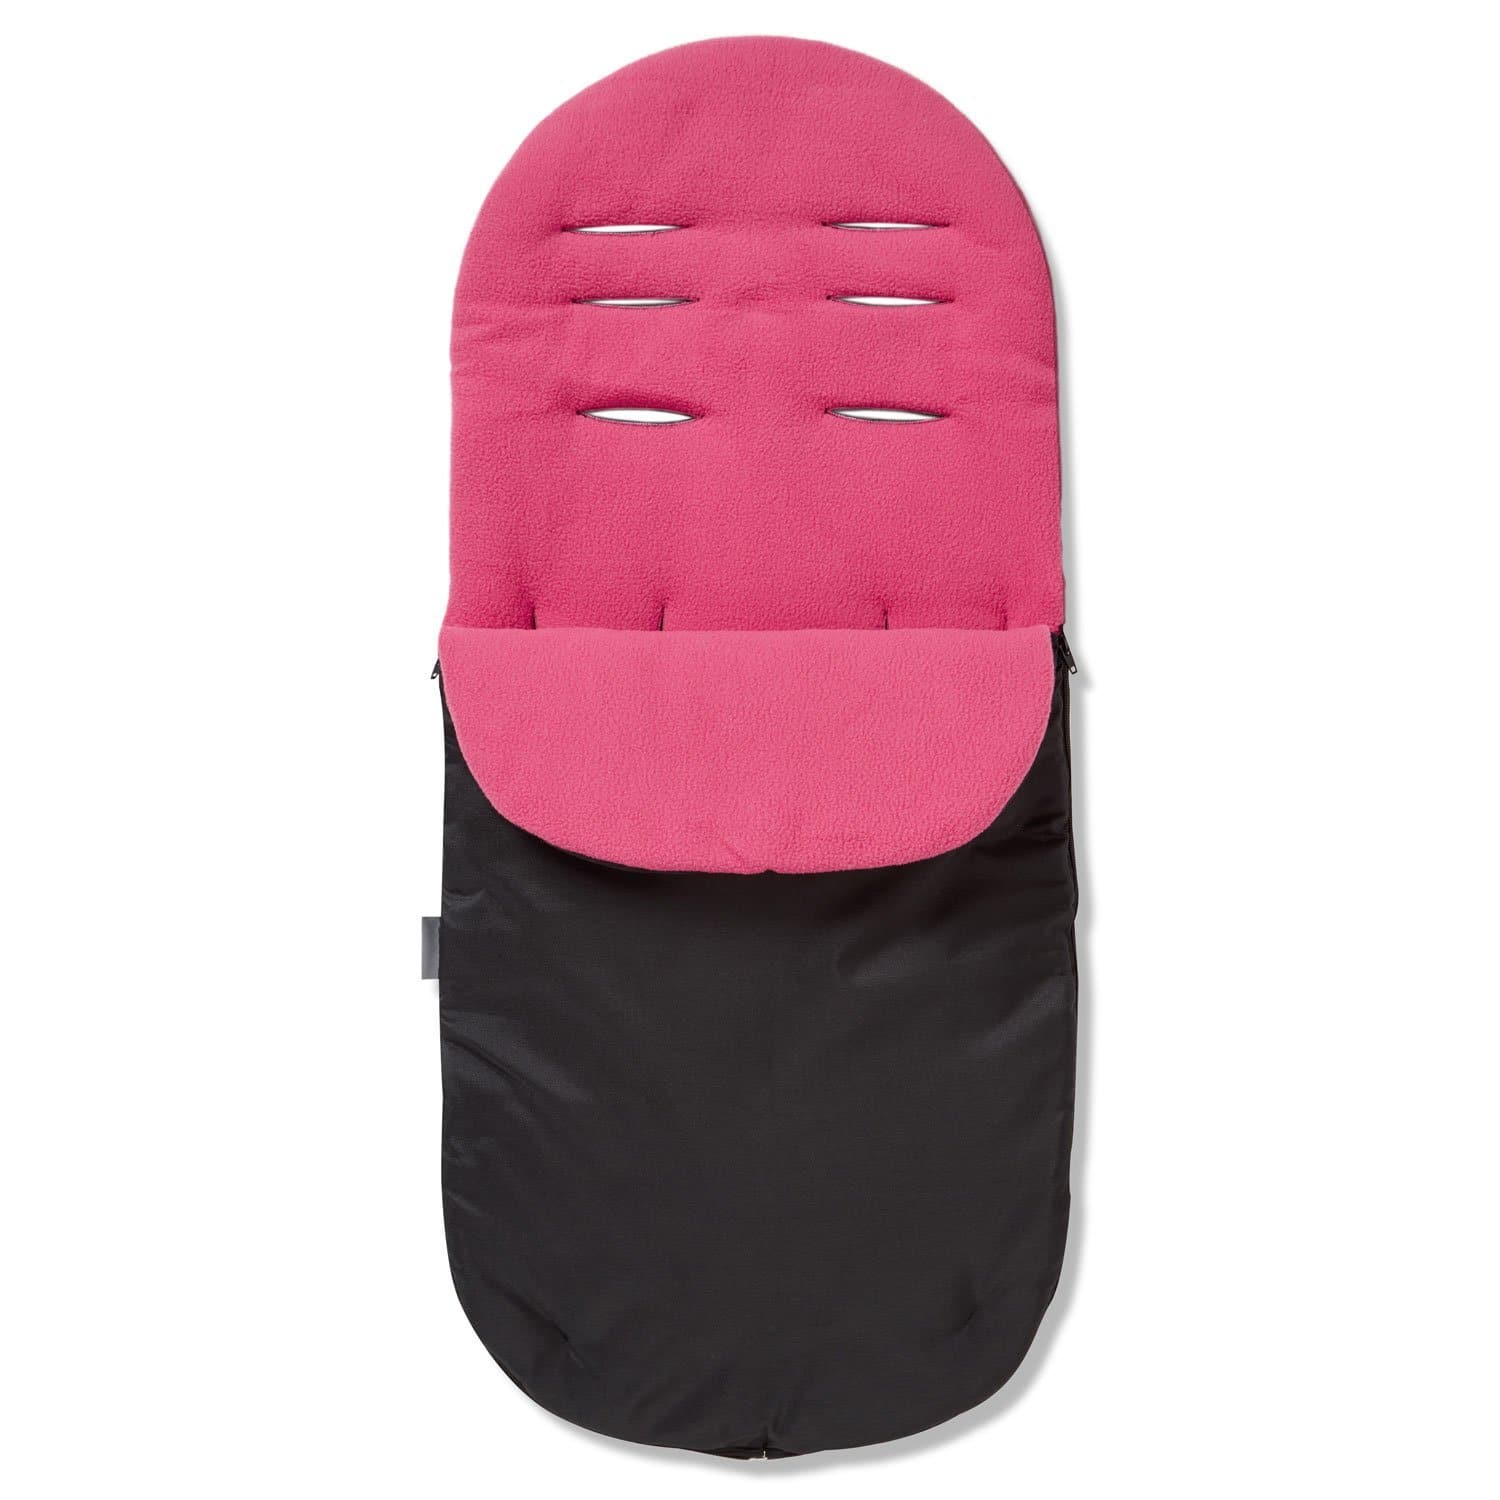 Footmuff / Cosy Toes Compatible with Urban Detour - Dark Pink / Fits All Models | For Your Little One